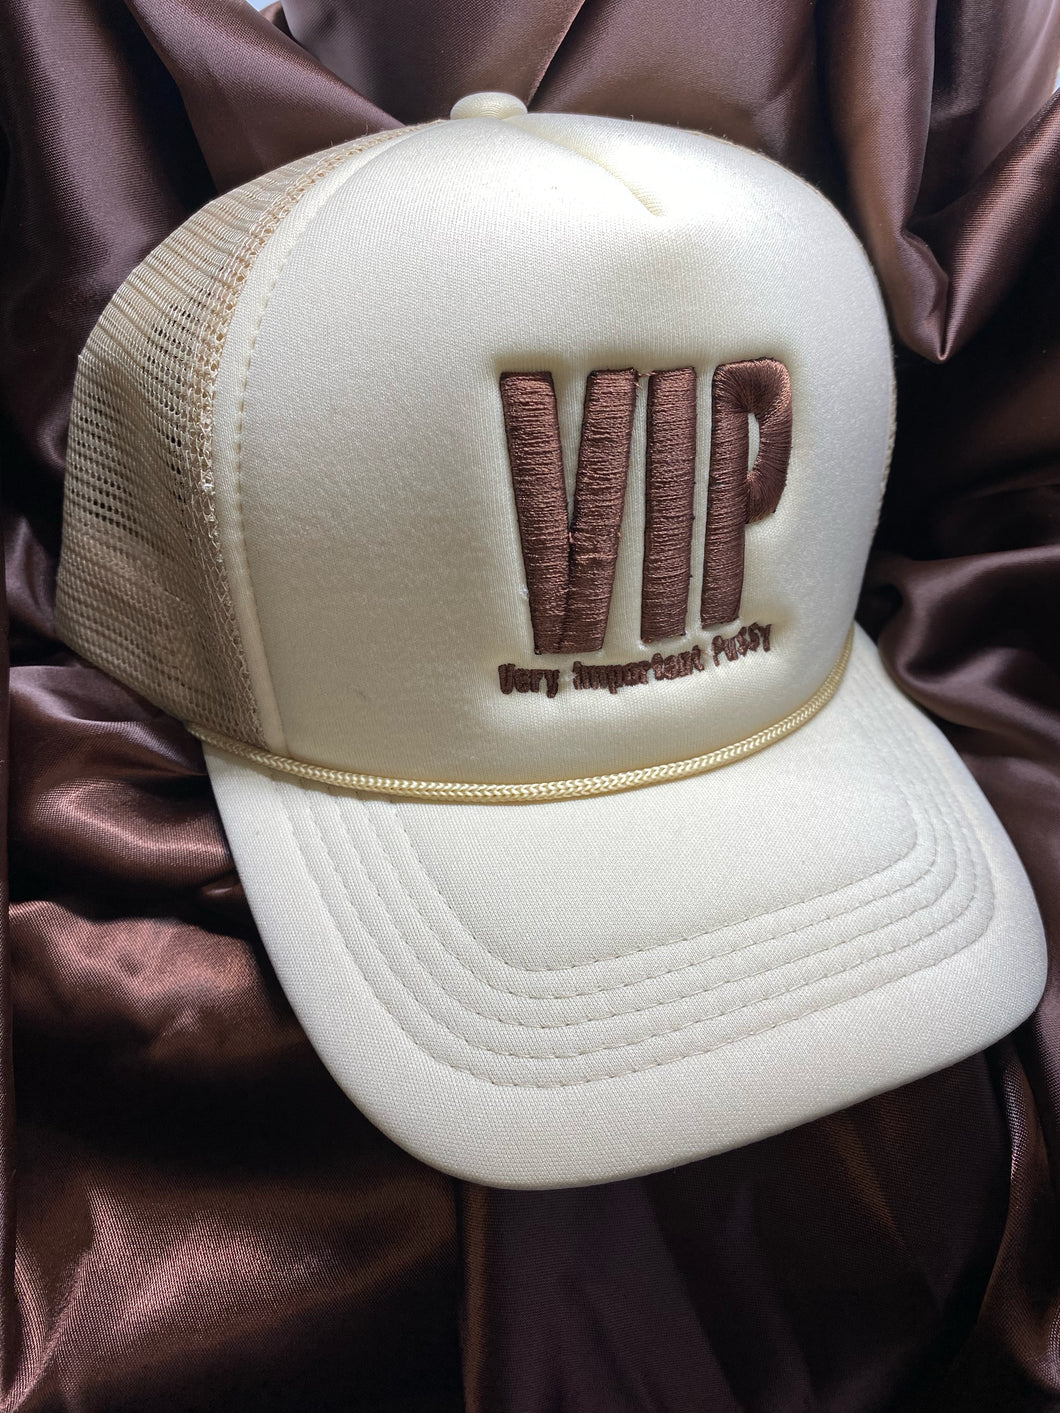 VIP Very Important Pussy Beige Trucker Hat with Brown writing